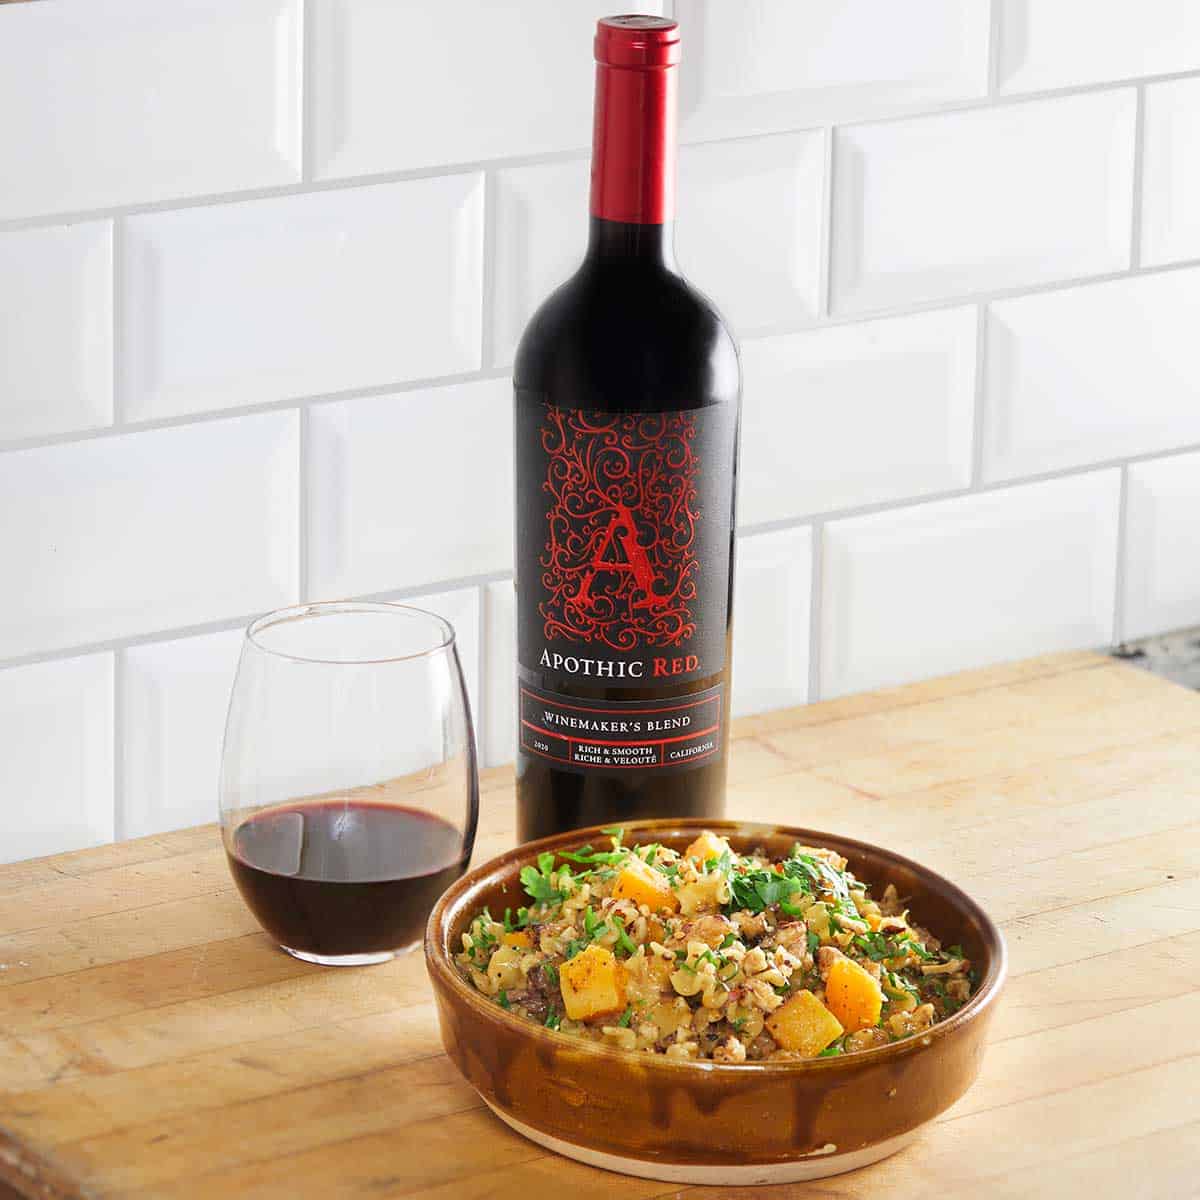 A buttery squash and duck pasta bowl in front of a glass and a bottle of Apothic Red